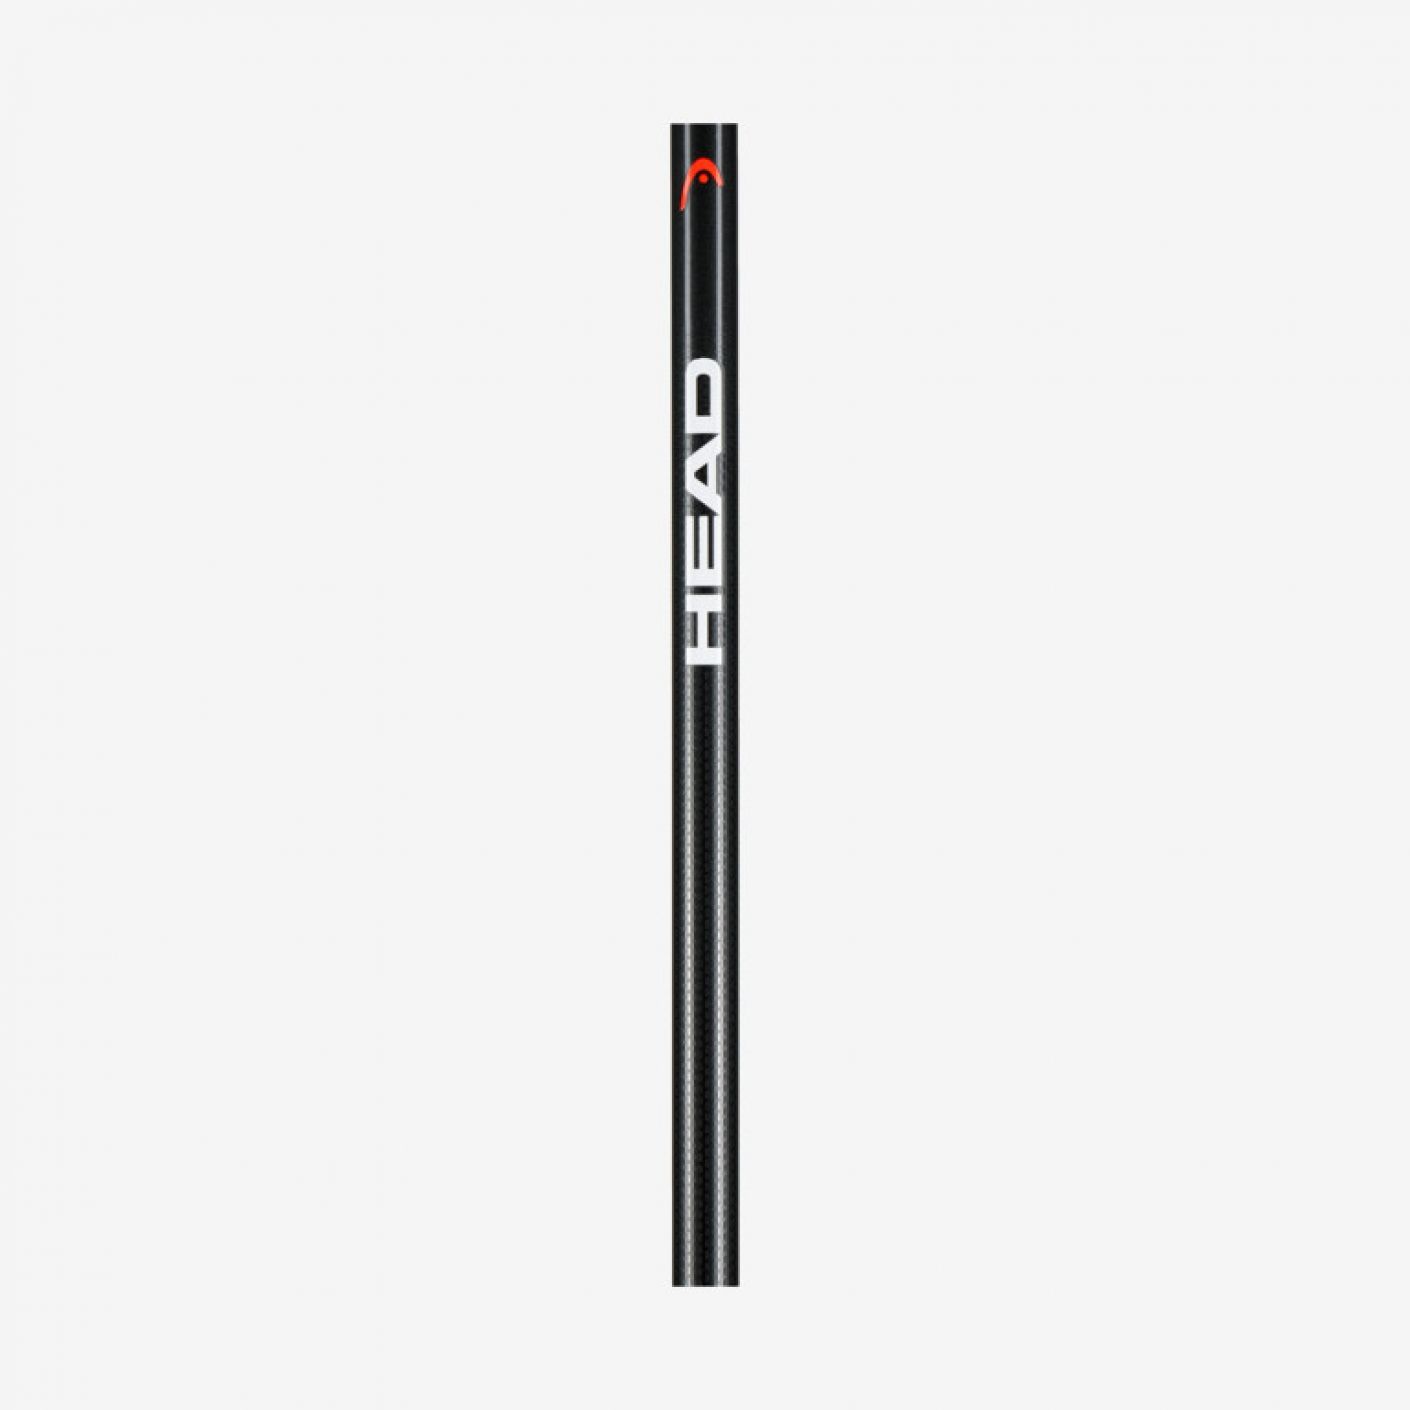 Head Bastoncini Frontside Performance Pole Anthracite/Red